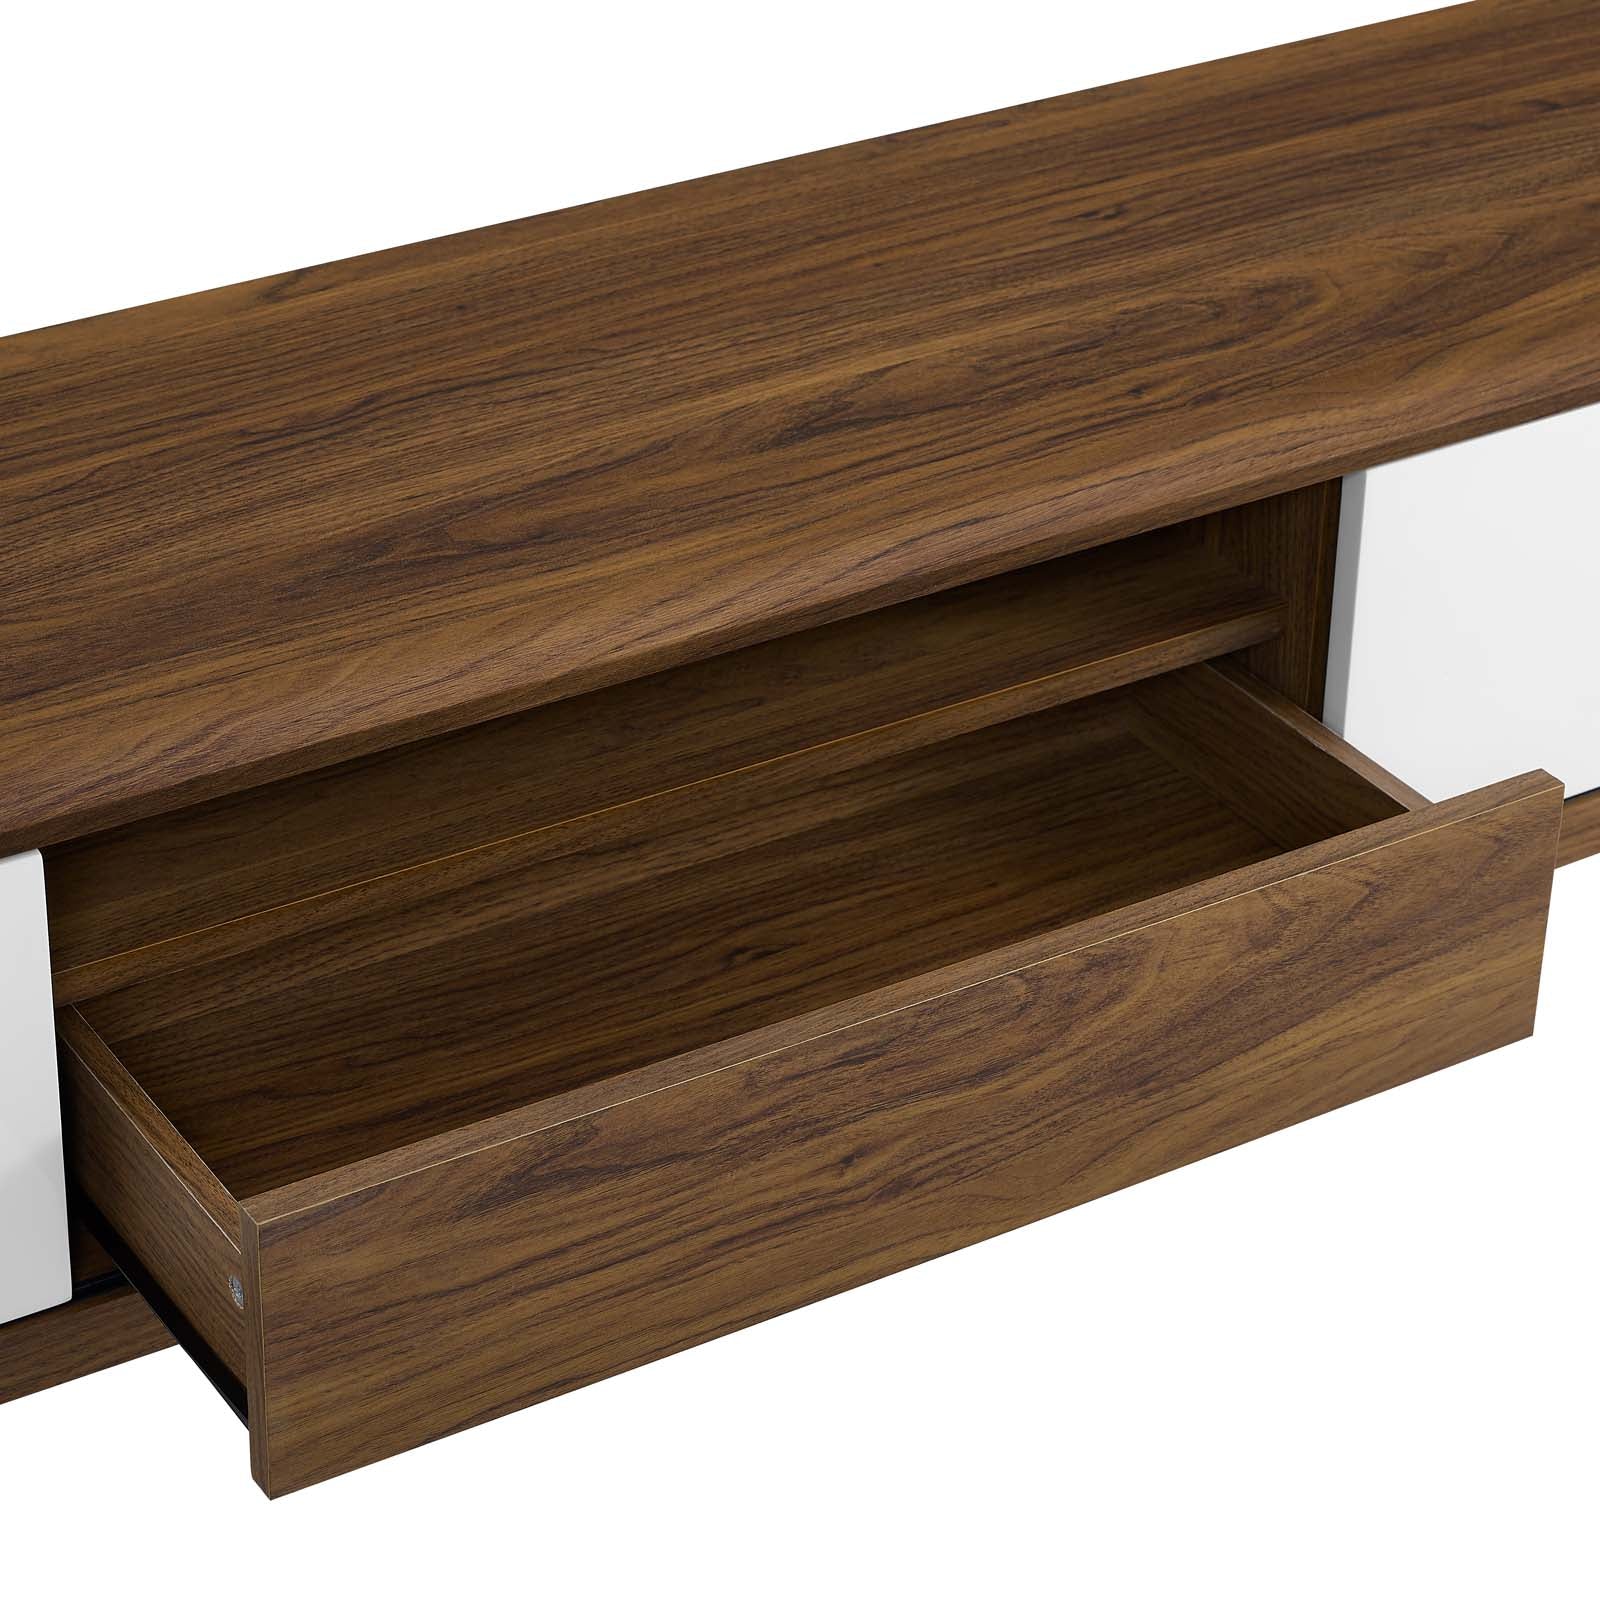 Envision 70" Media Console Wood TV Stand - East Shore Modern Home Furnishings